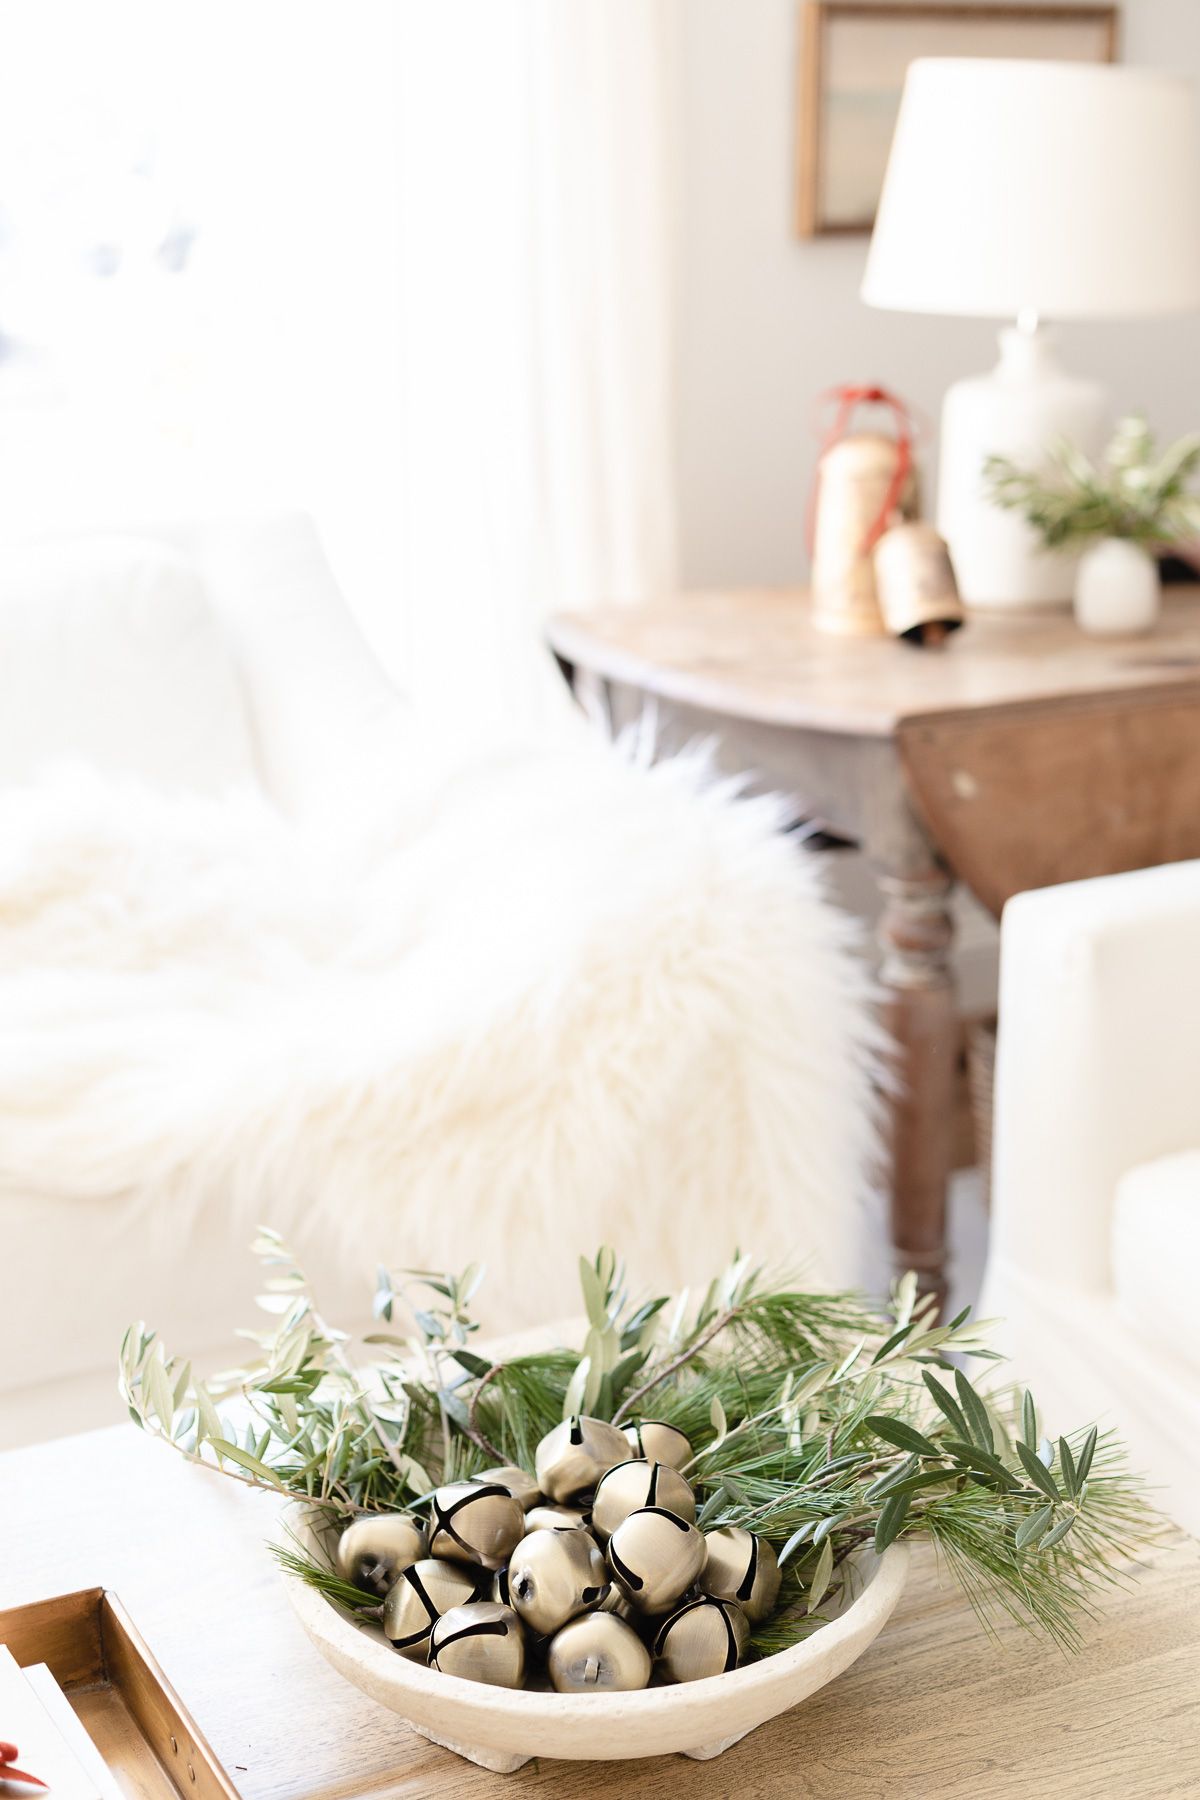 A bowl of greenery and jingle bells on a wooden coffee table